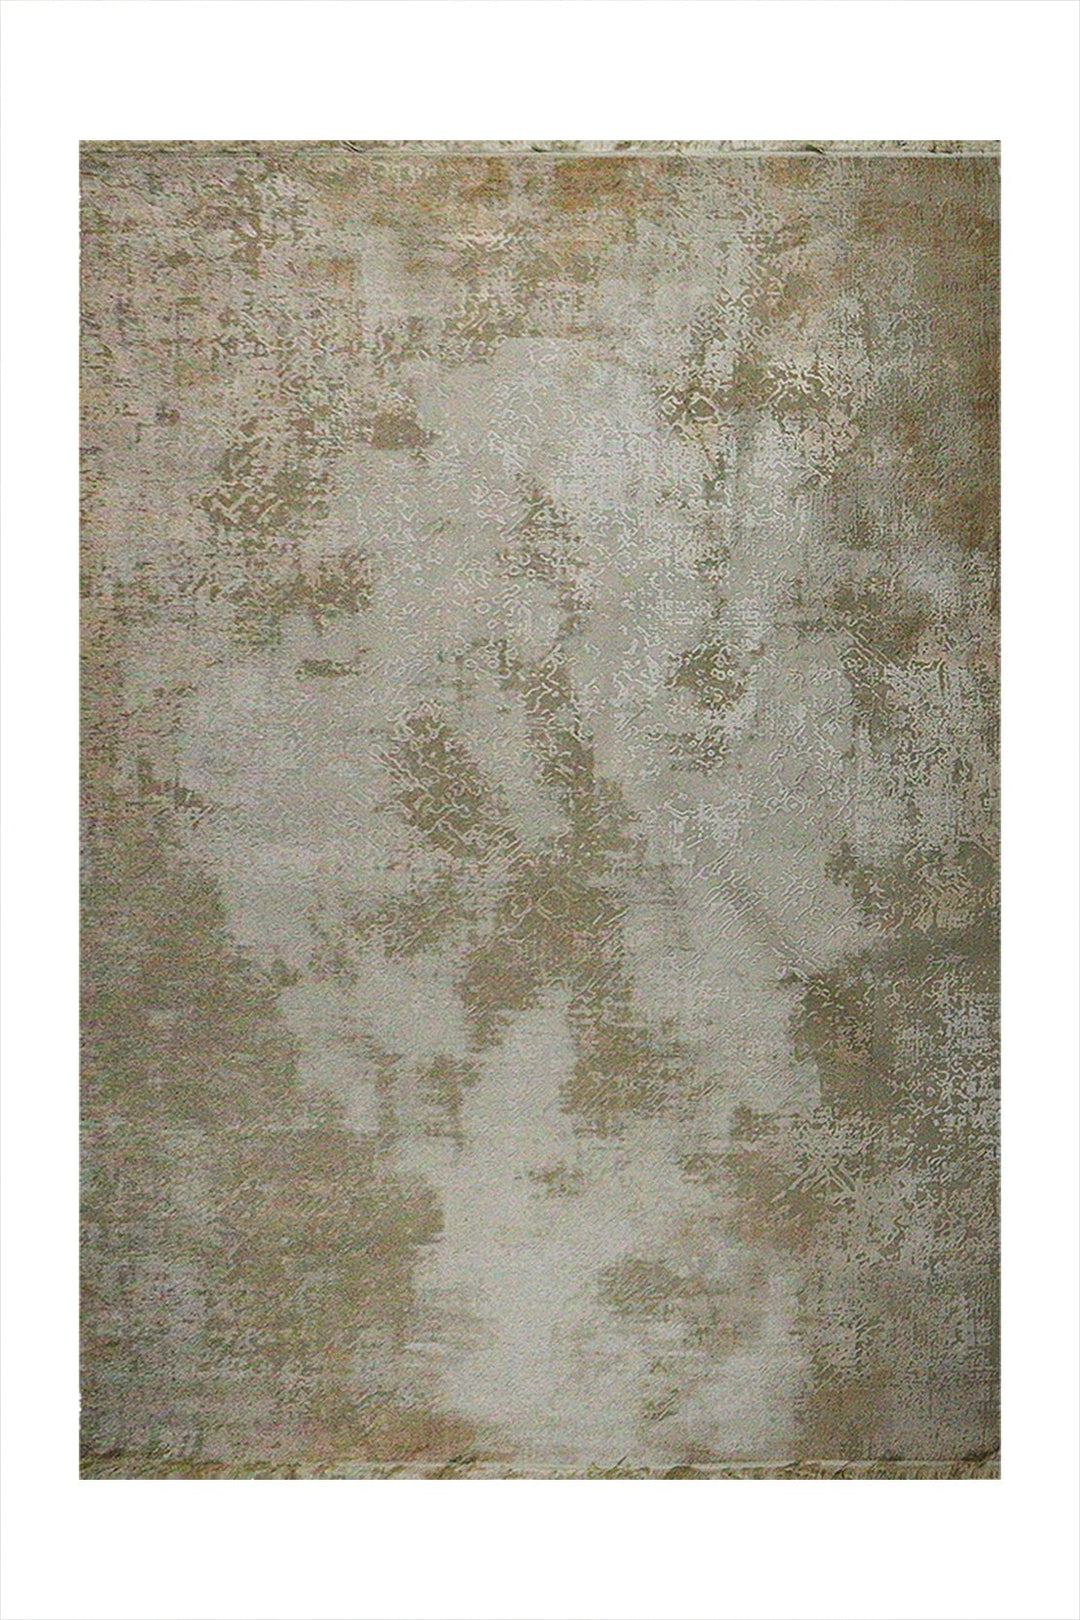 Iranian Premium Quality Silk 1200 Rug - 8.2 x 11. FT - Beige - Resilient Construction for Long-Lasting Use - V Surfaces